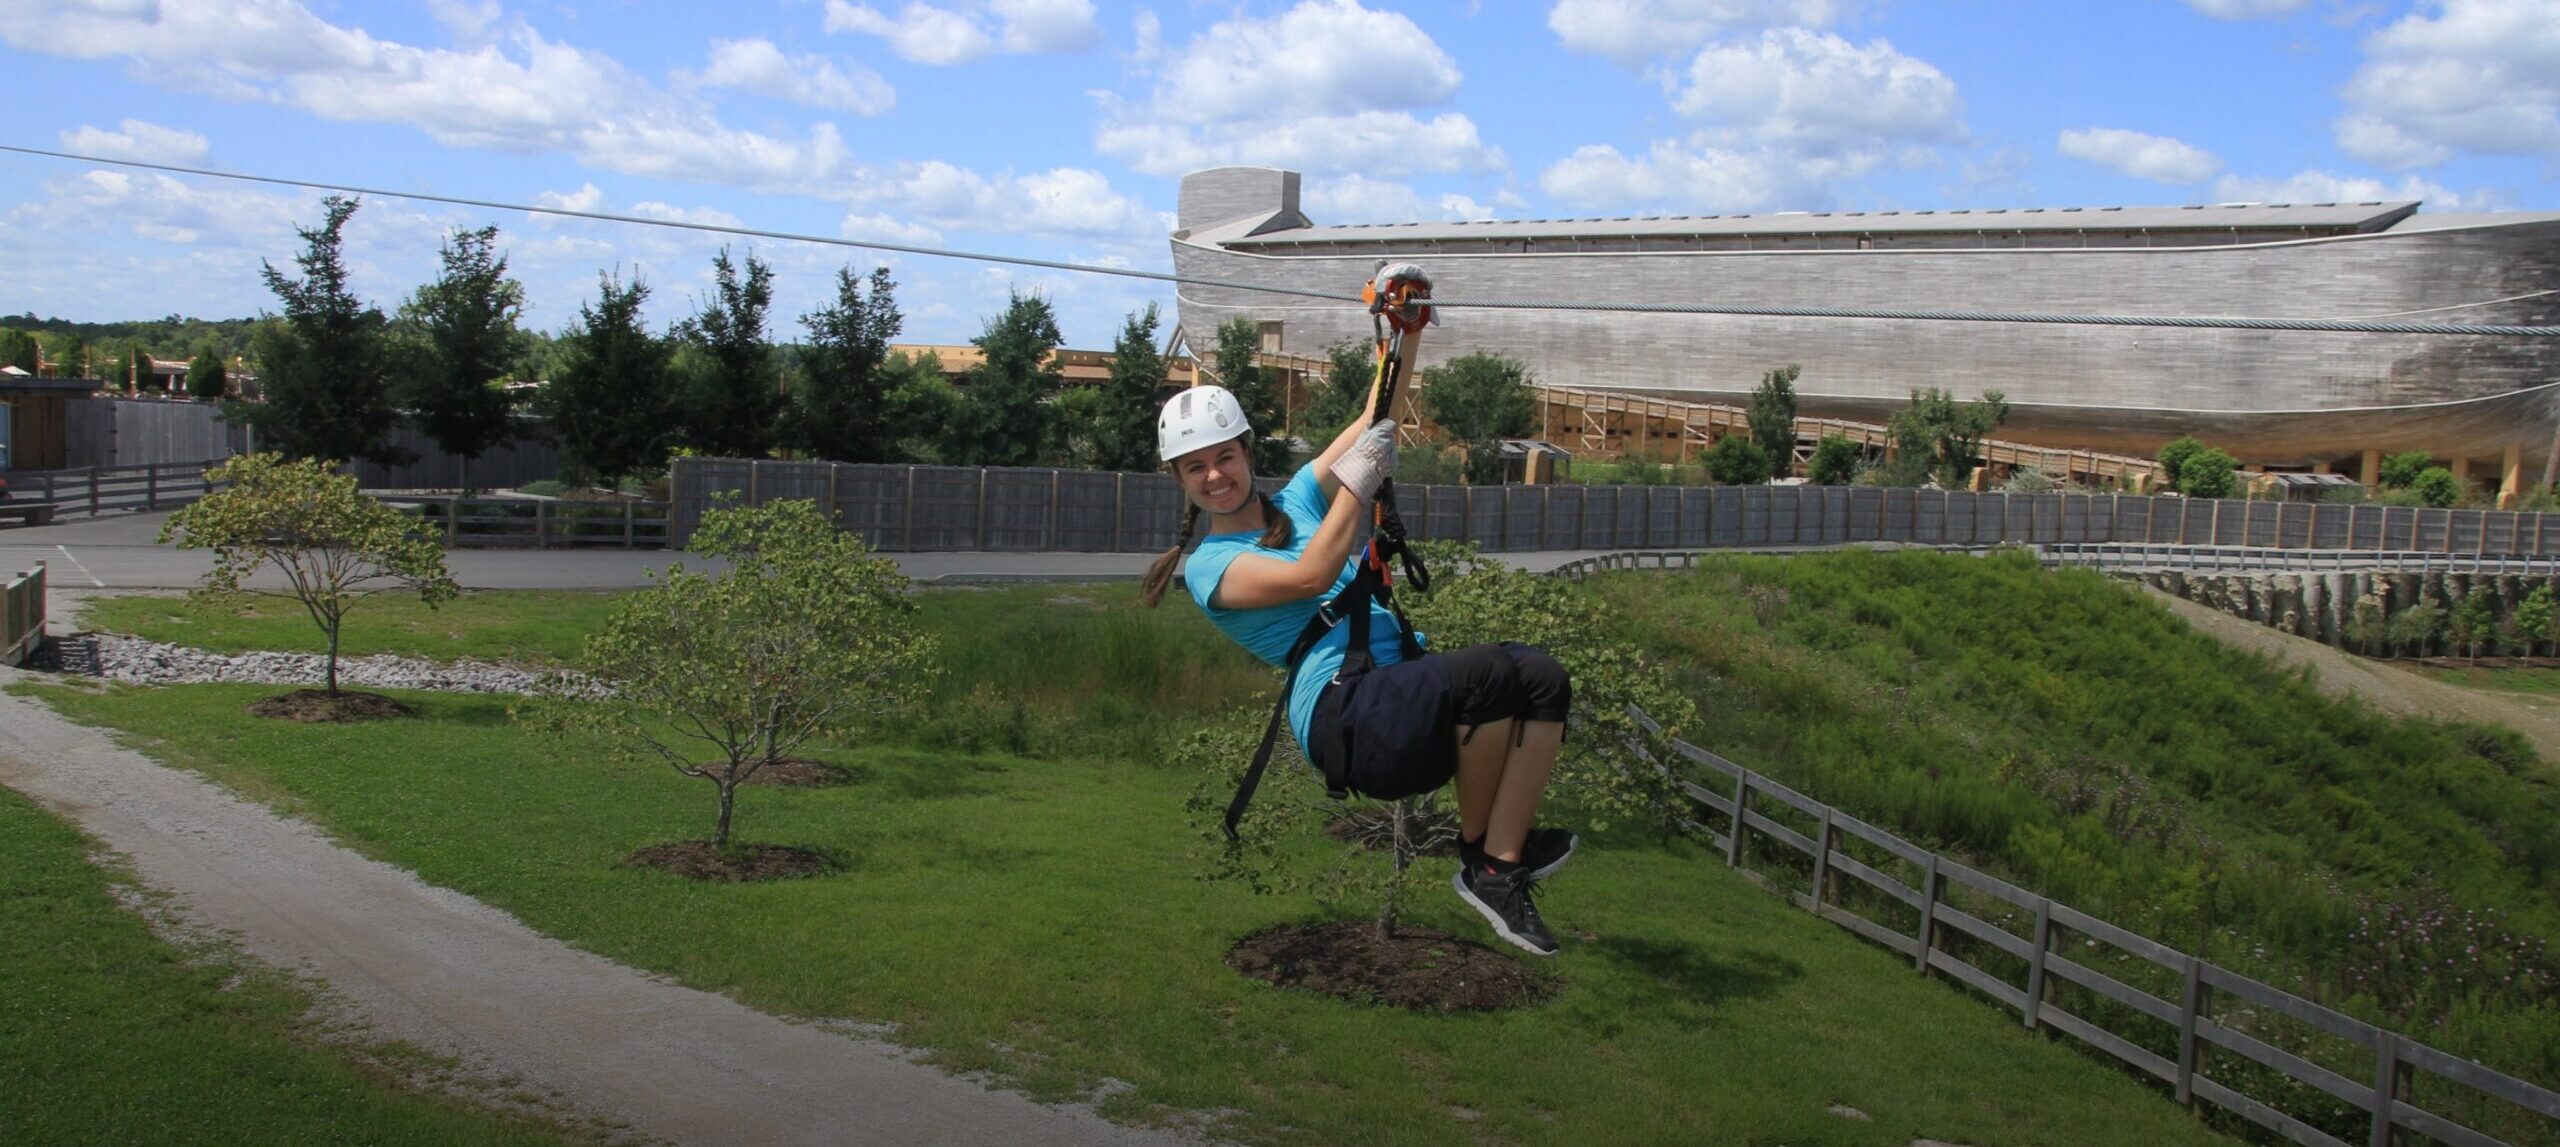 ziplining in kentucky with the ark encounter in the background